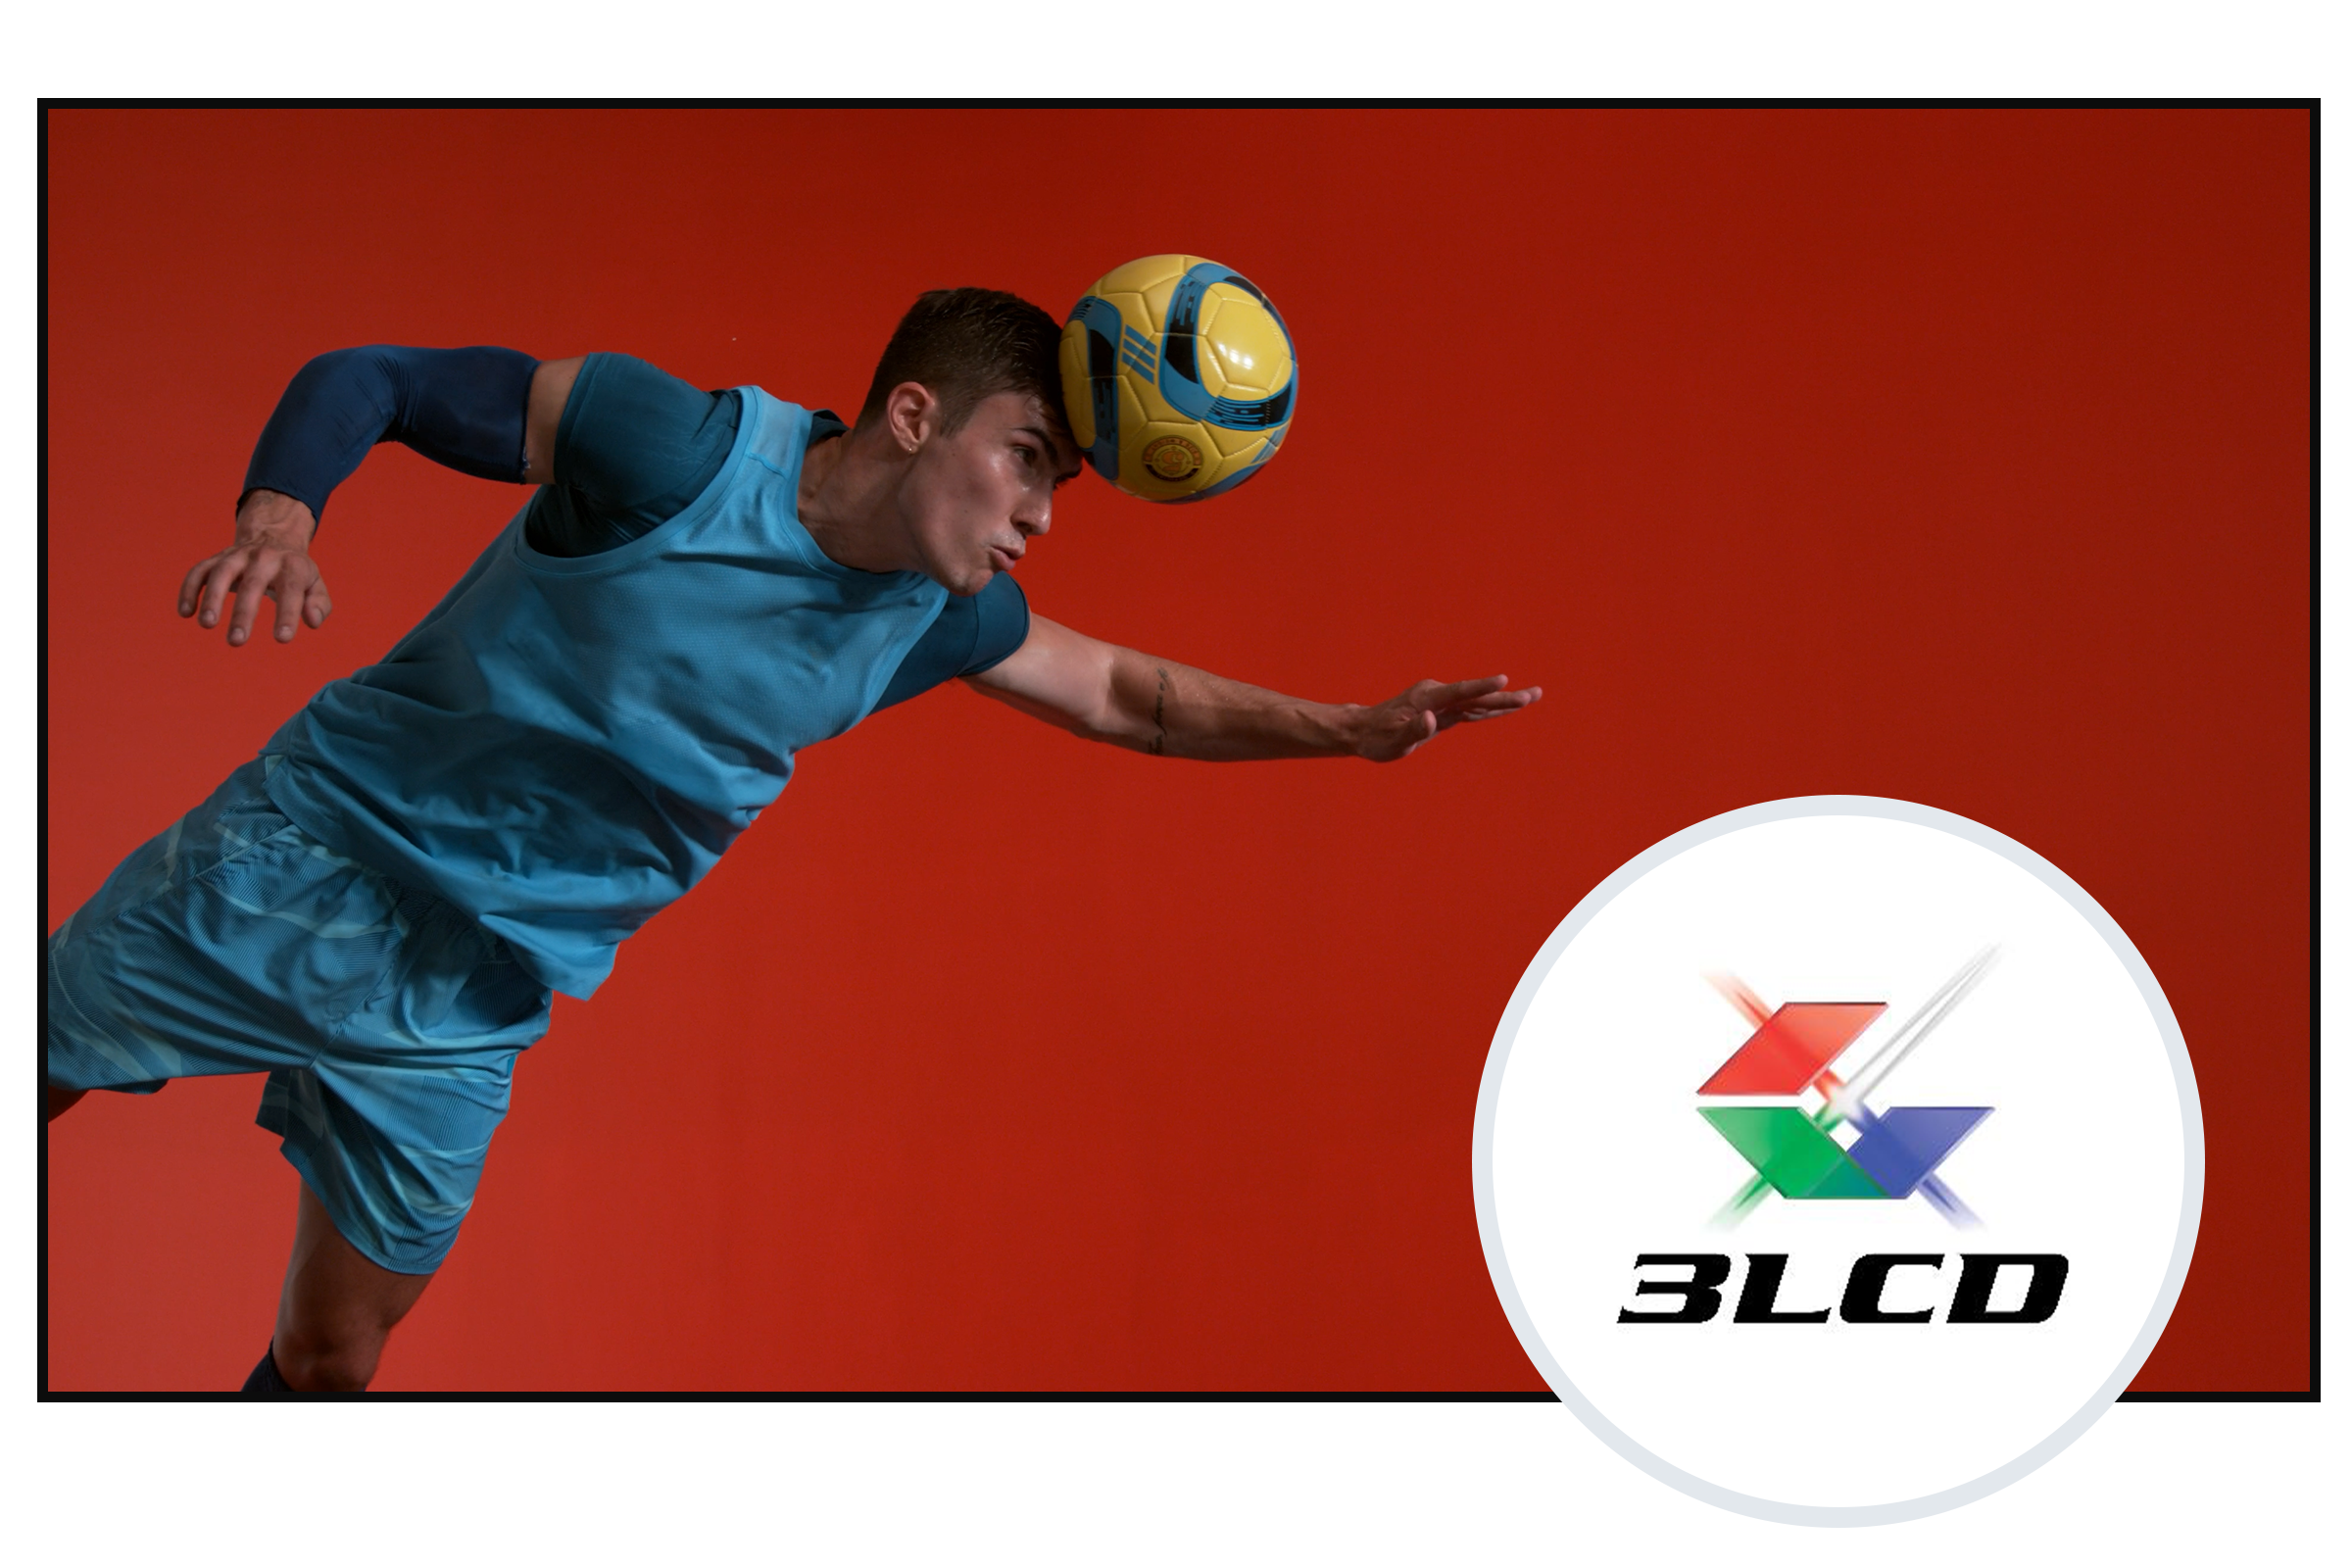 3LCD logo. Action shot of a soccer player on a projection screen.